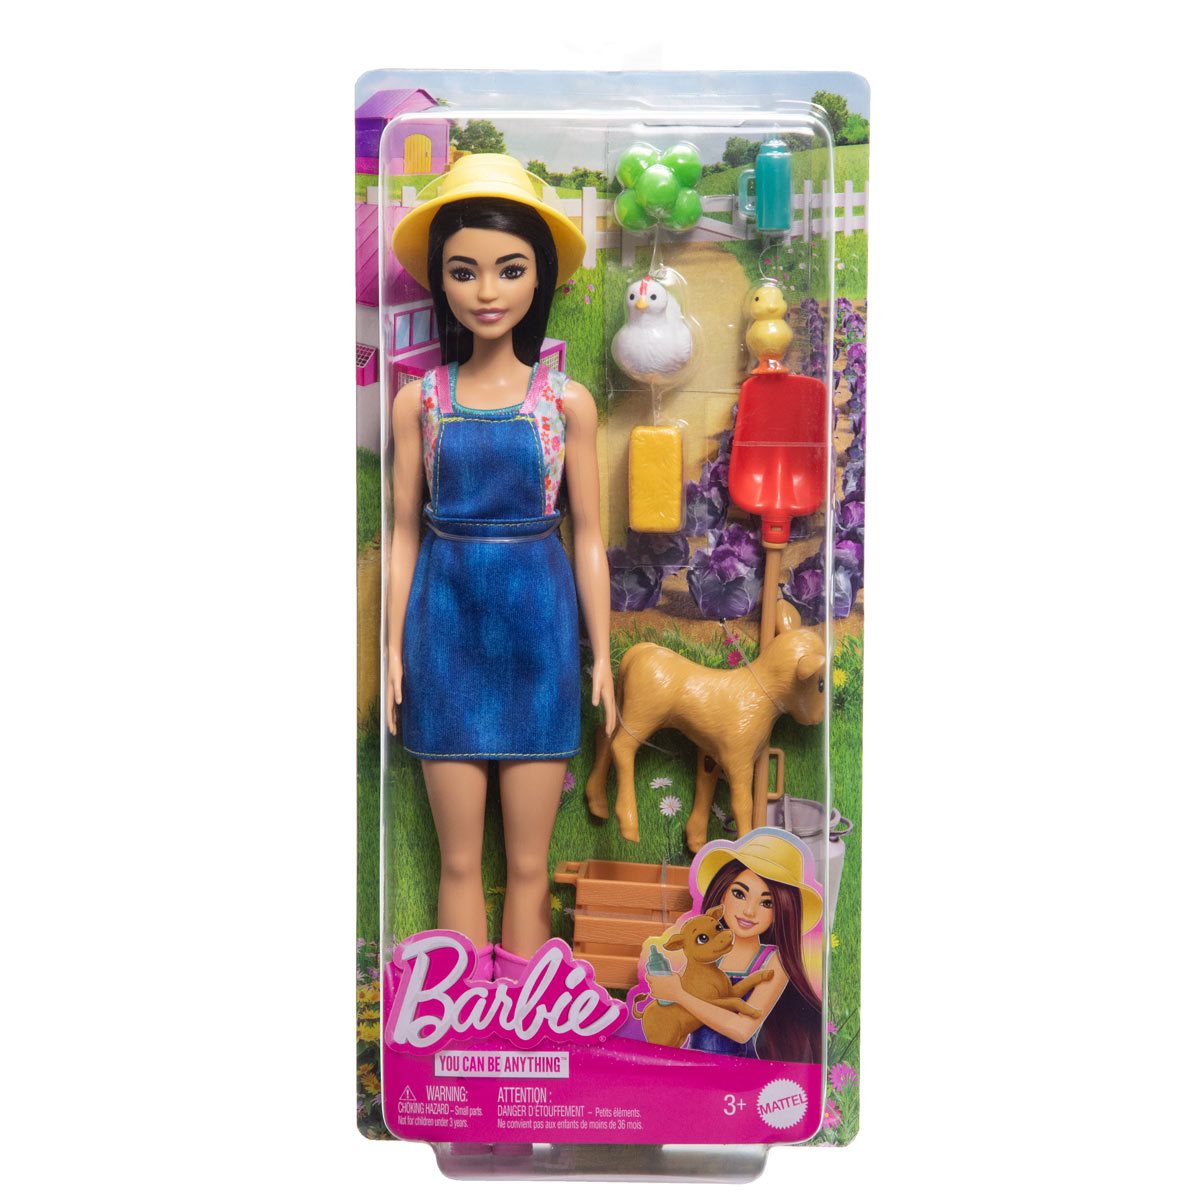 Barbie Looks Doll #16 with Blonde Hair - Entertainment Earth